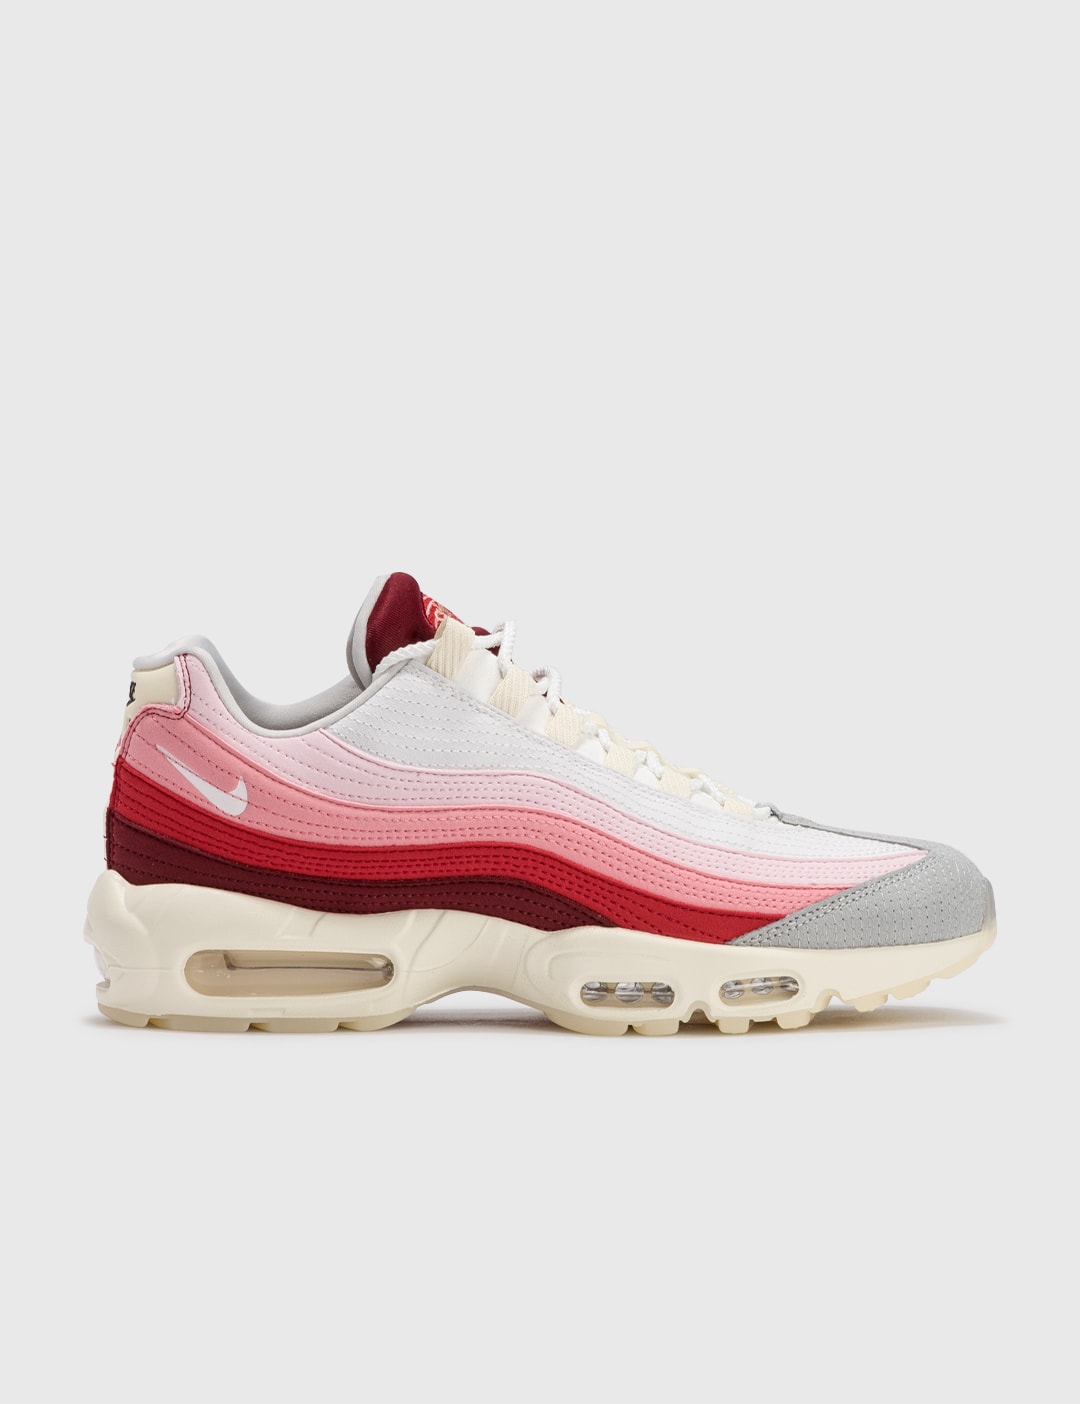 Strippen Huisje vrijgesteld Nike - Nike Air Max 95 QS “Anatomy of Air” | HBX - Globally Curated Fashion  and Lifestyle by Hypebeast